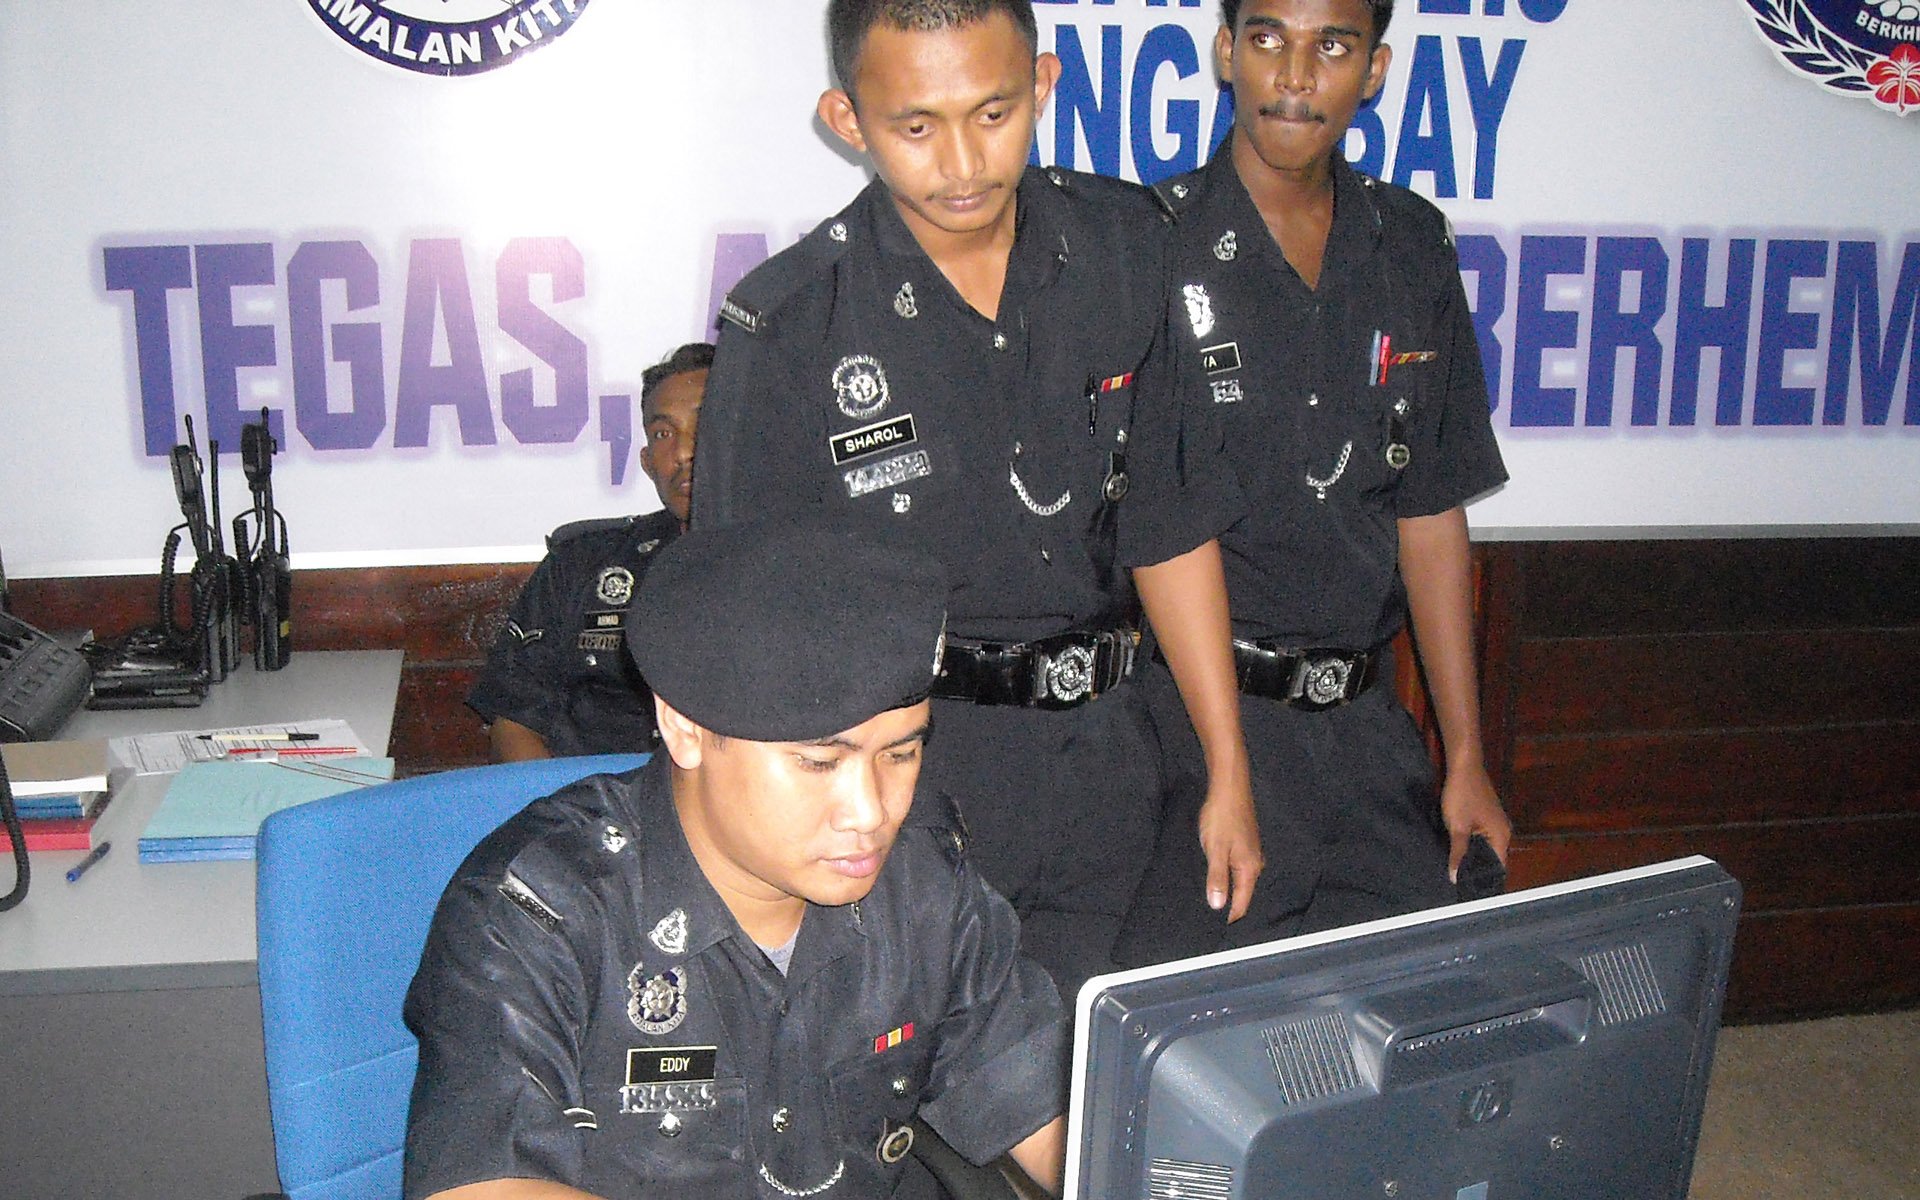 Malaysian police arrest Bitcoin mining equipment thieves